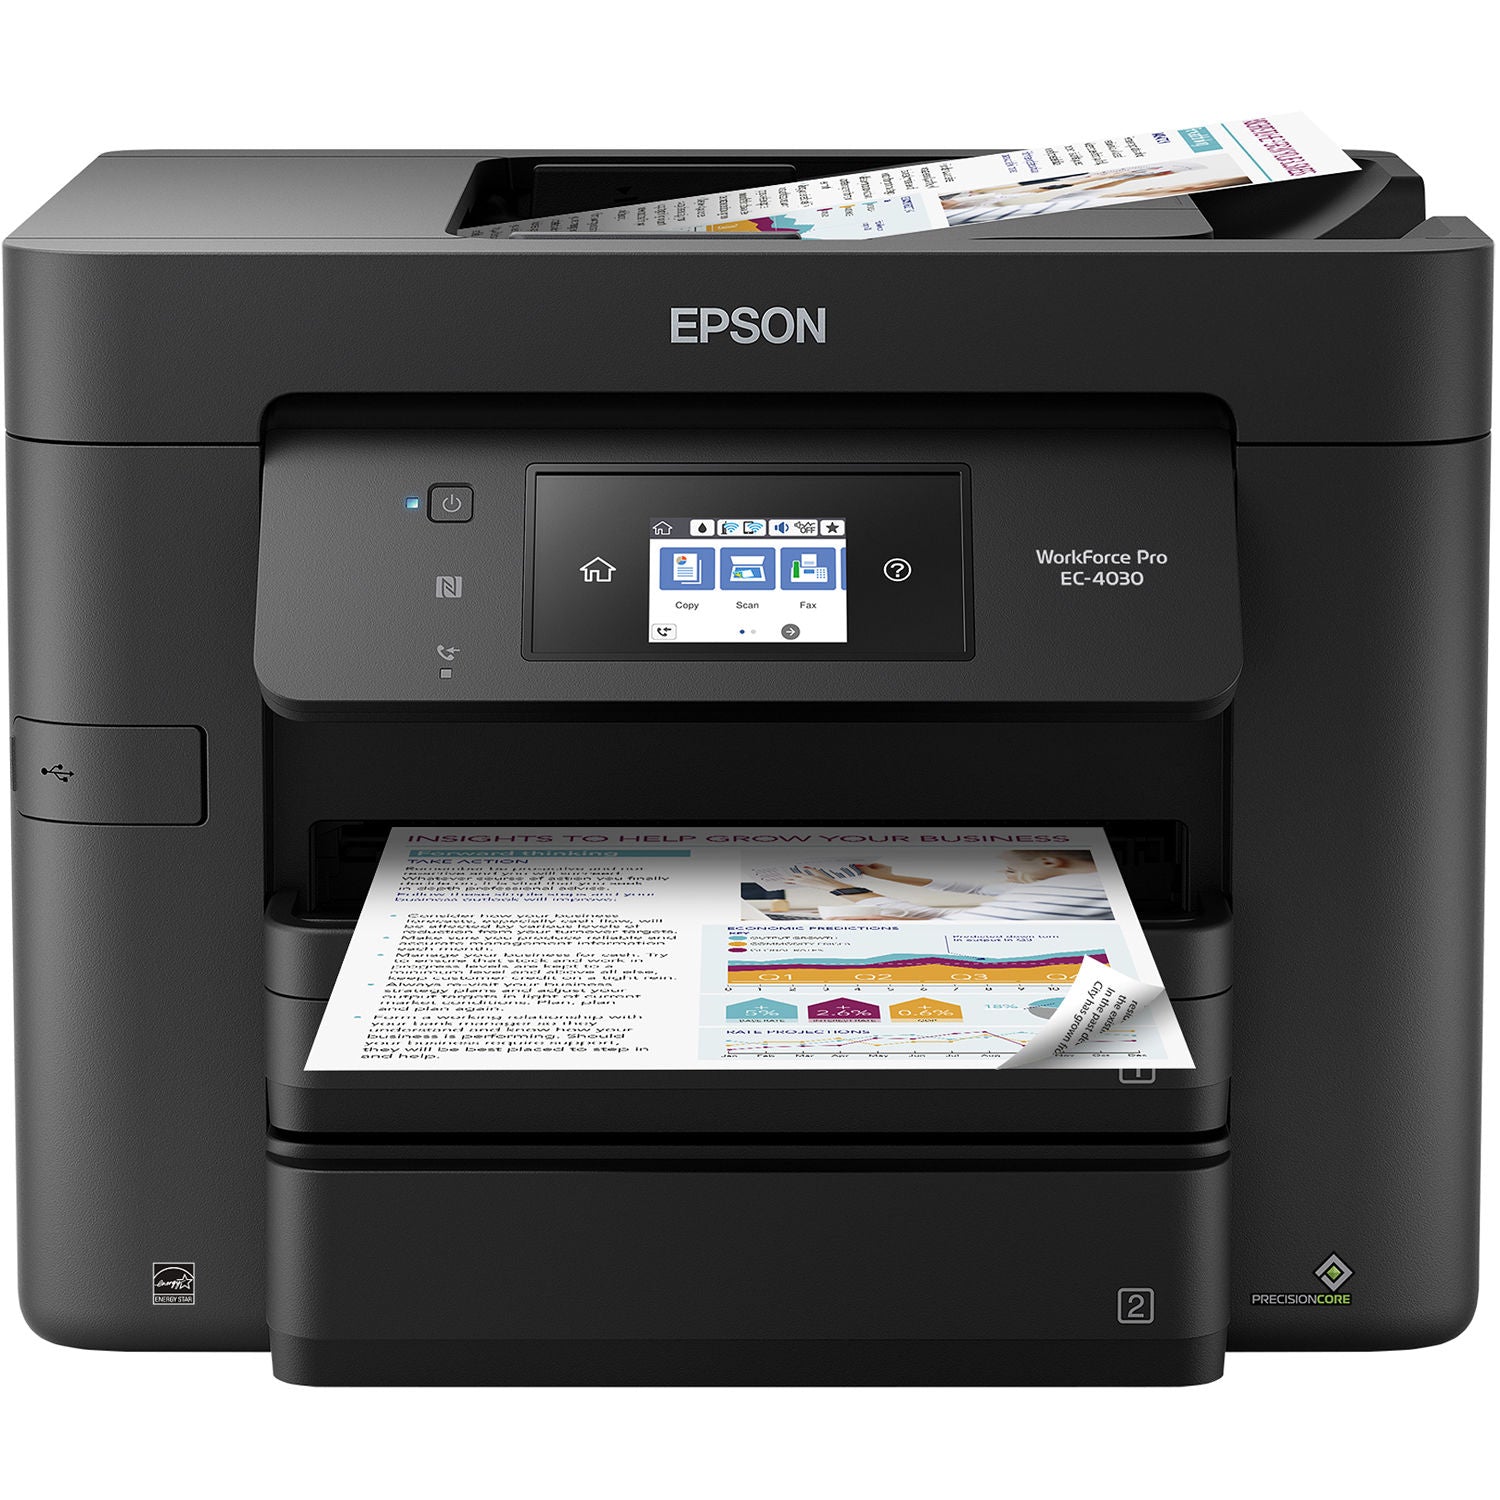 Absolute Toner New Epson Workforce Pro EC-4030 High-Speed Wireless Color Inkjet Multifunction Printer With Automatic Duplex Printing Showroom Color Copier